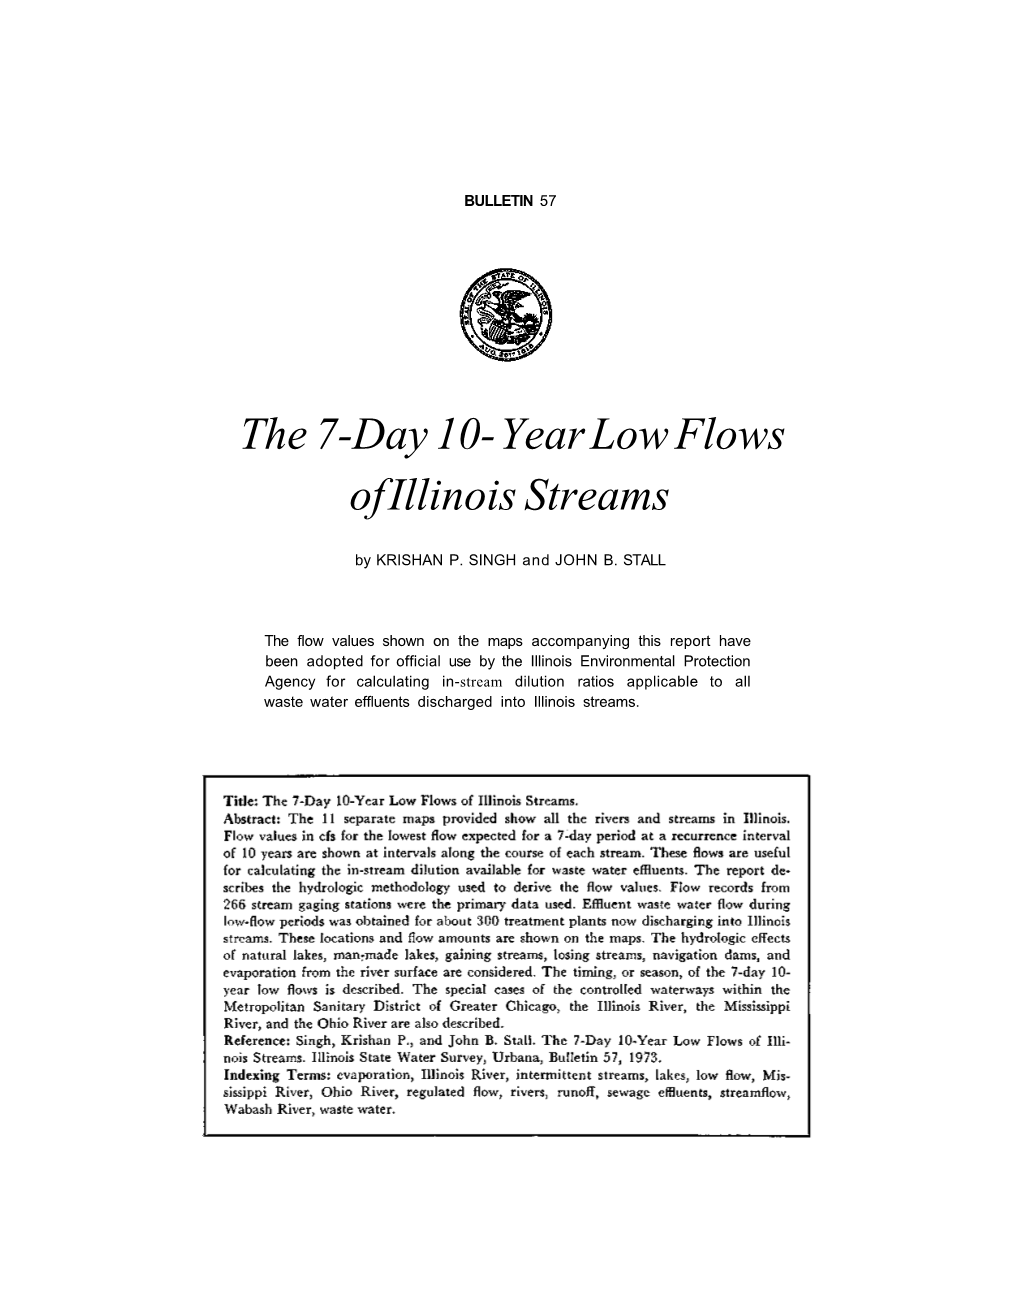 7-Day 10-Year Low Flows of Illinois Streams